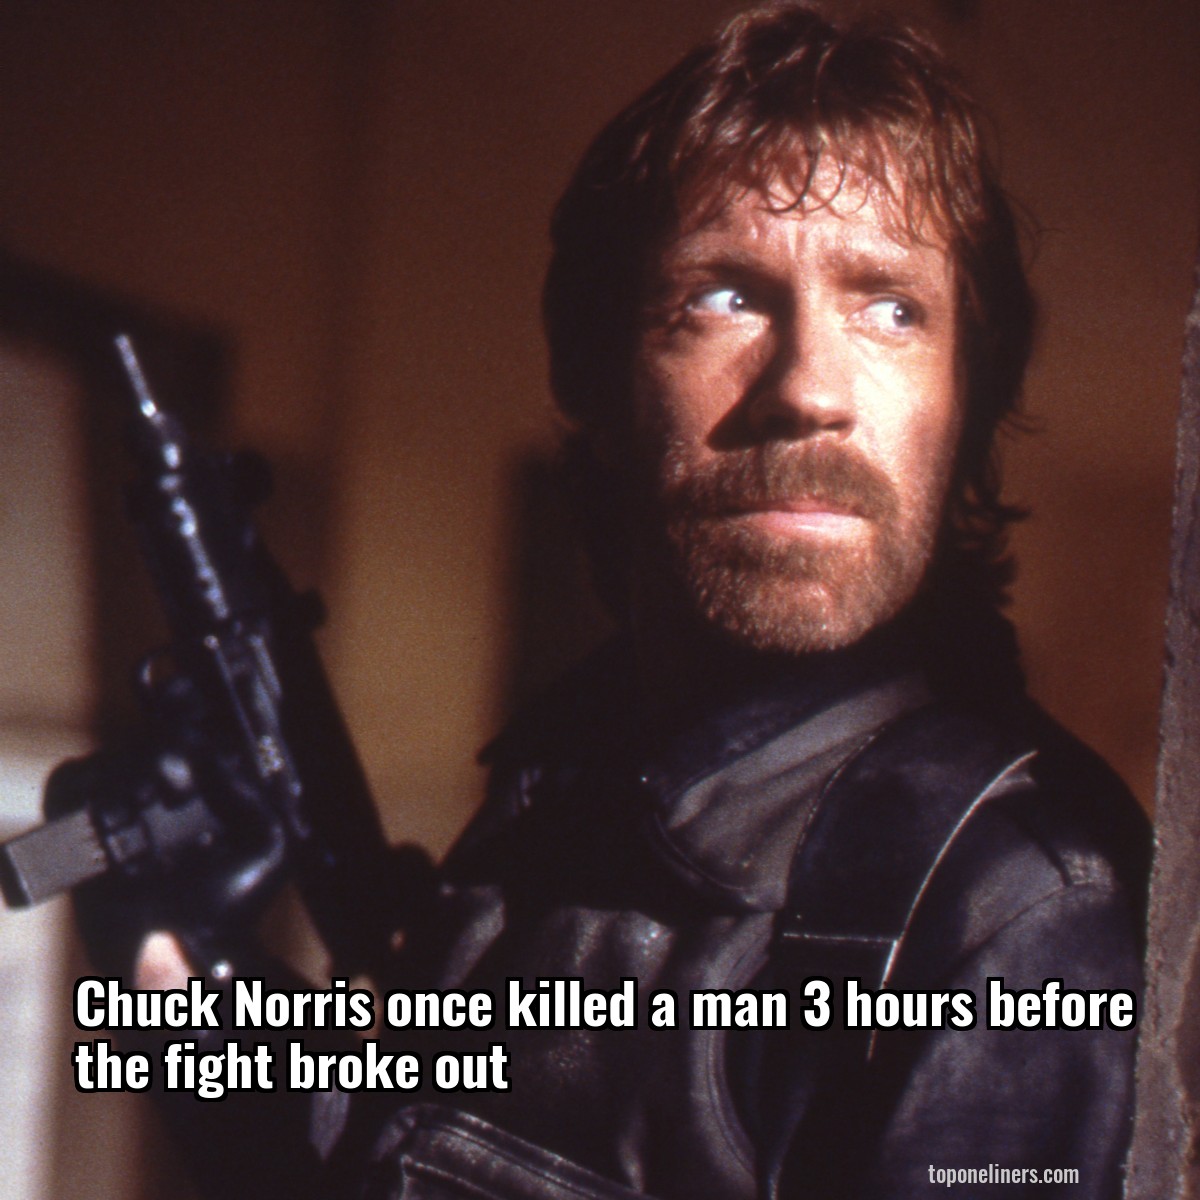 Chuck Norris once killed a man 3 hours before the fight broke out